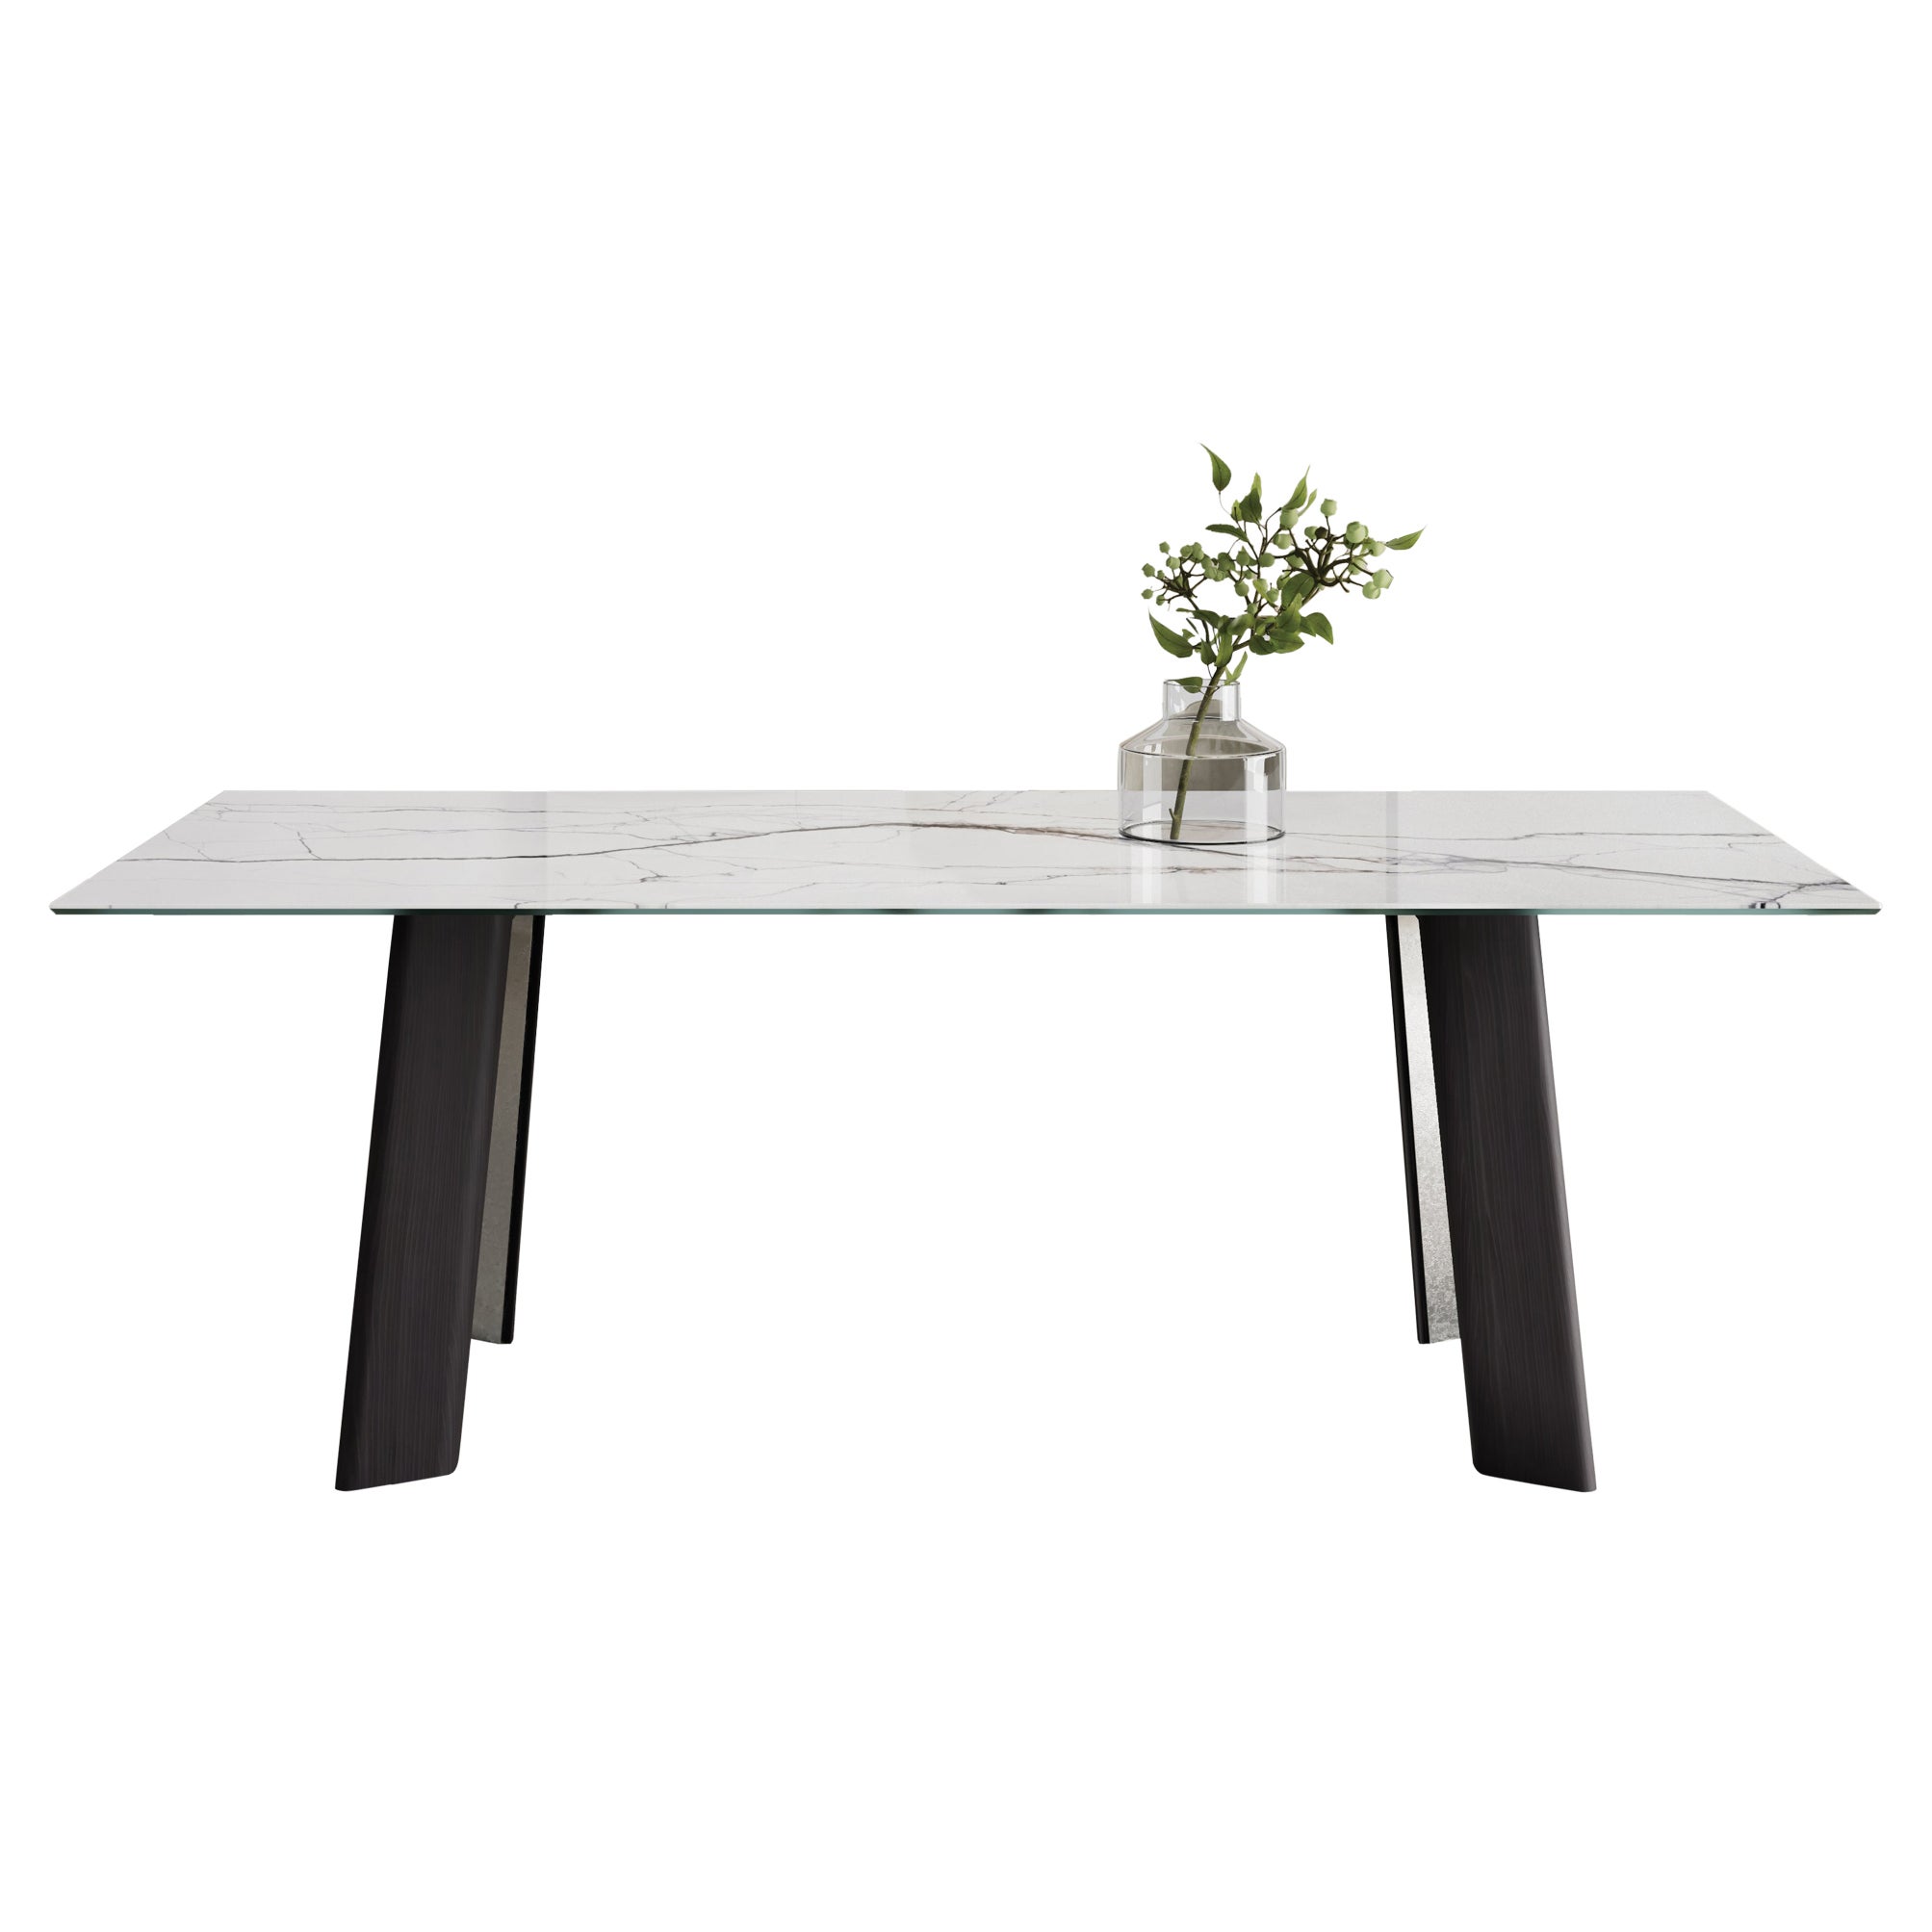 Afrodite Dining Table by Chinellato Design For Sale